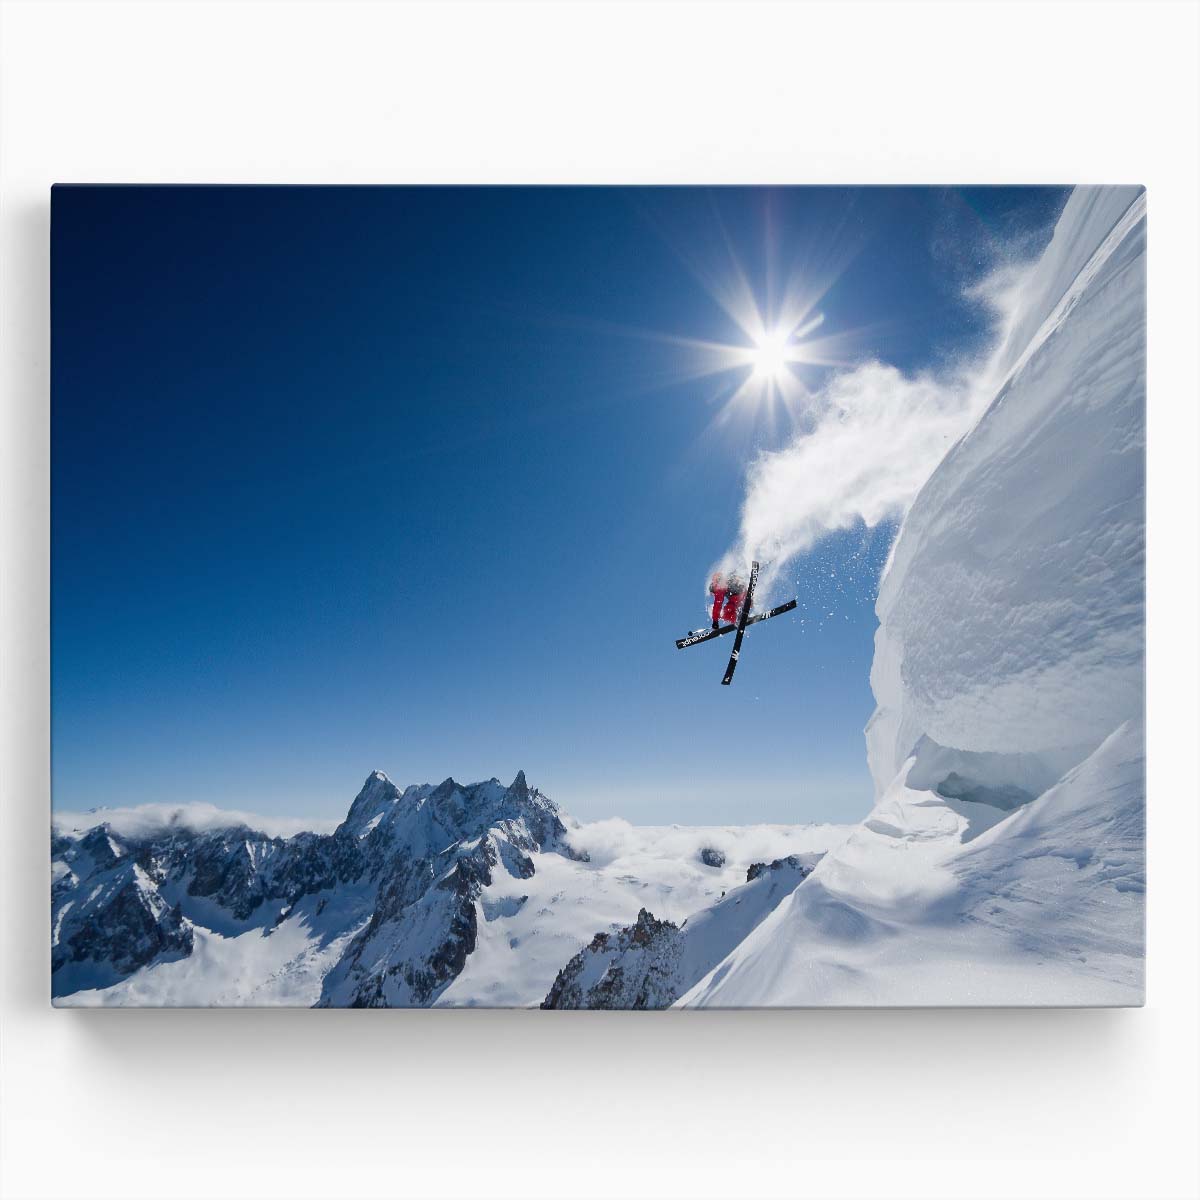 Extreme Ski Jump in Snowy Alps - Tristan Shu Wall Art by Luxuriance Designs. Made in USA.